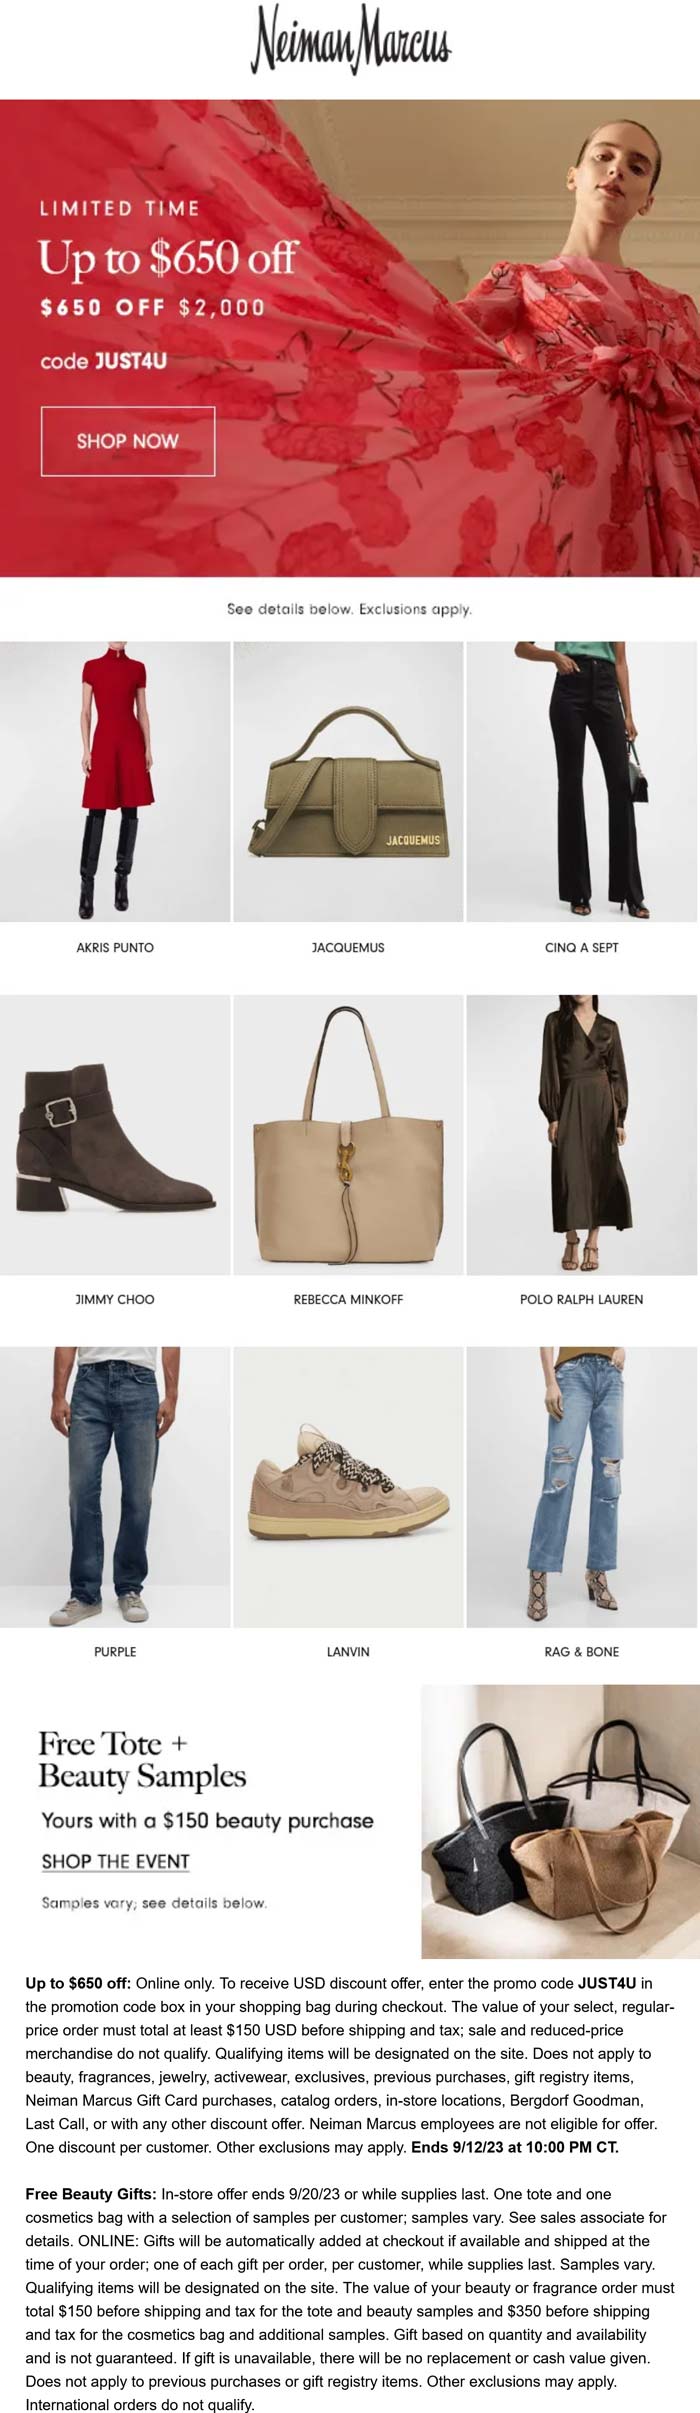 Neiman Marcus stores Coupon  $30-$650 off $150+ free tote on $150 beauty at Neiman Marcus via promo code JUST4U #neimanmarcus 